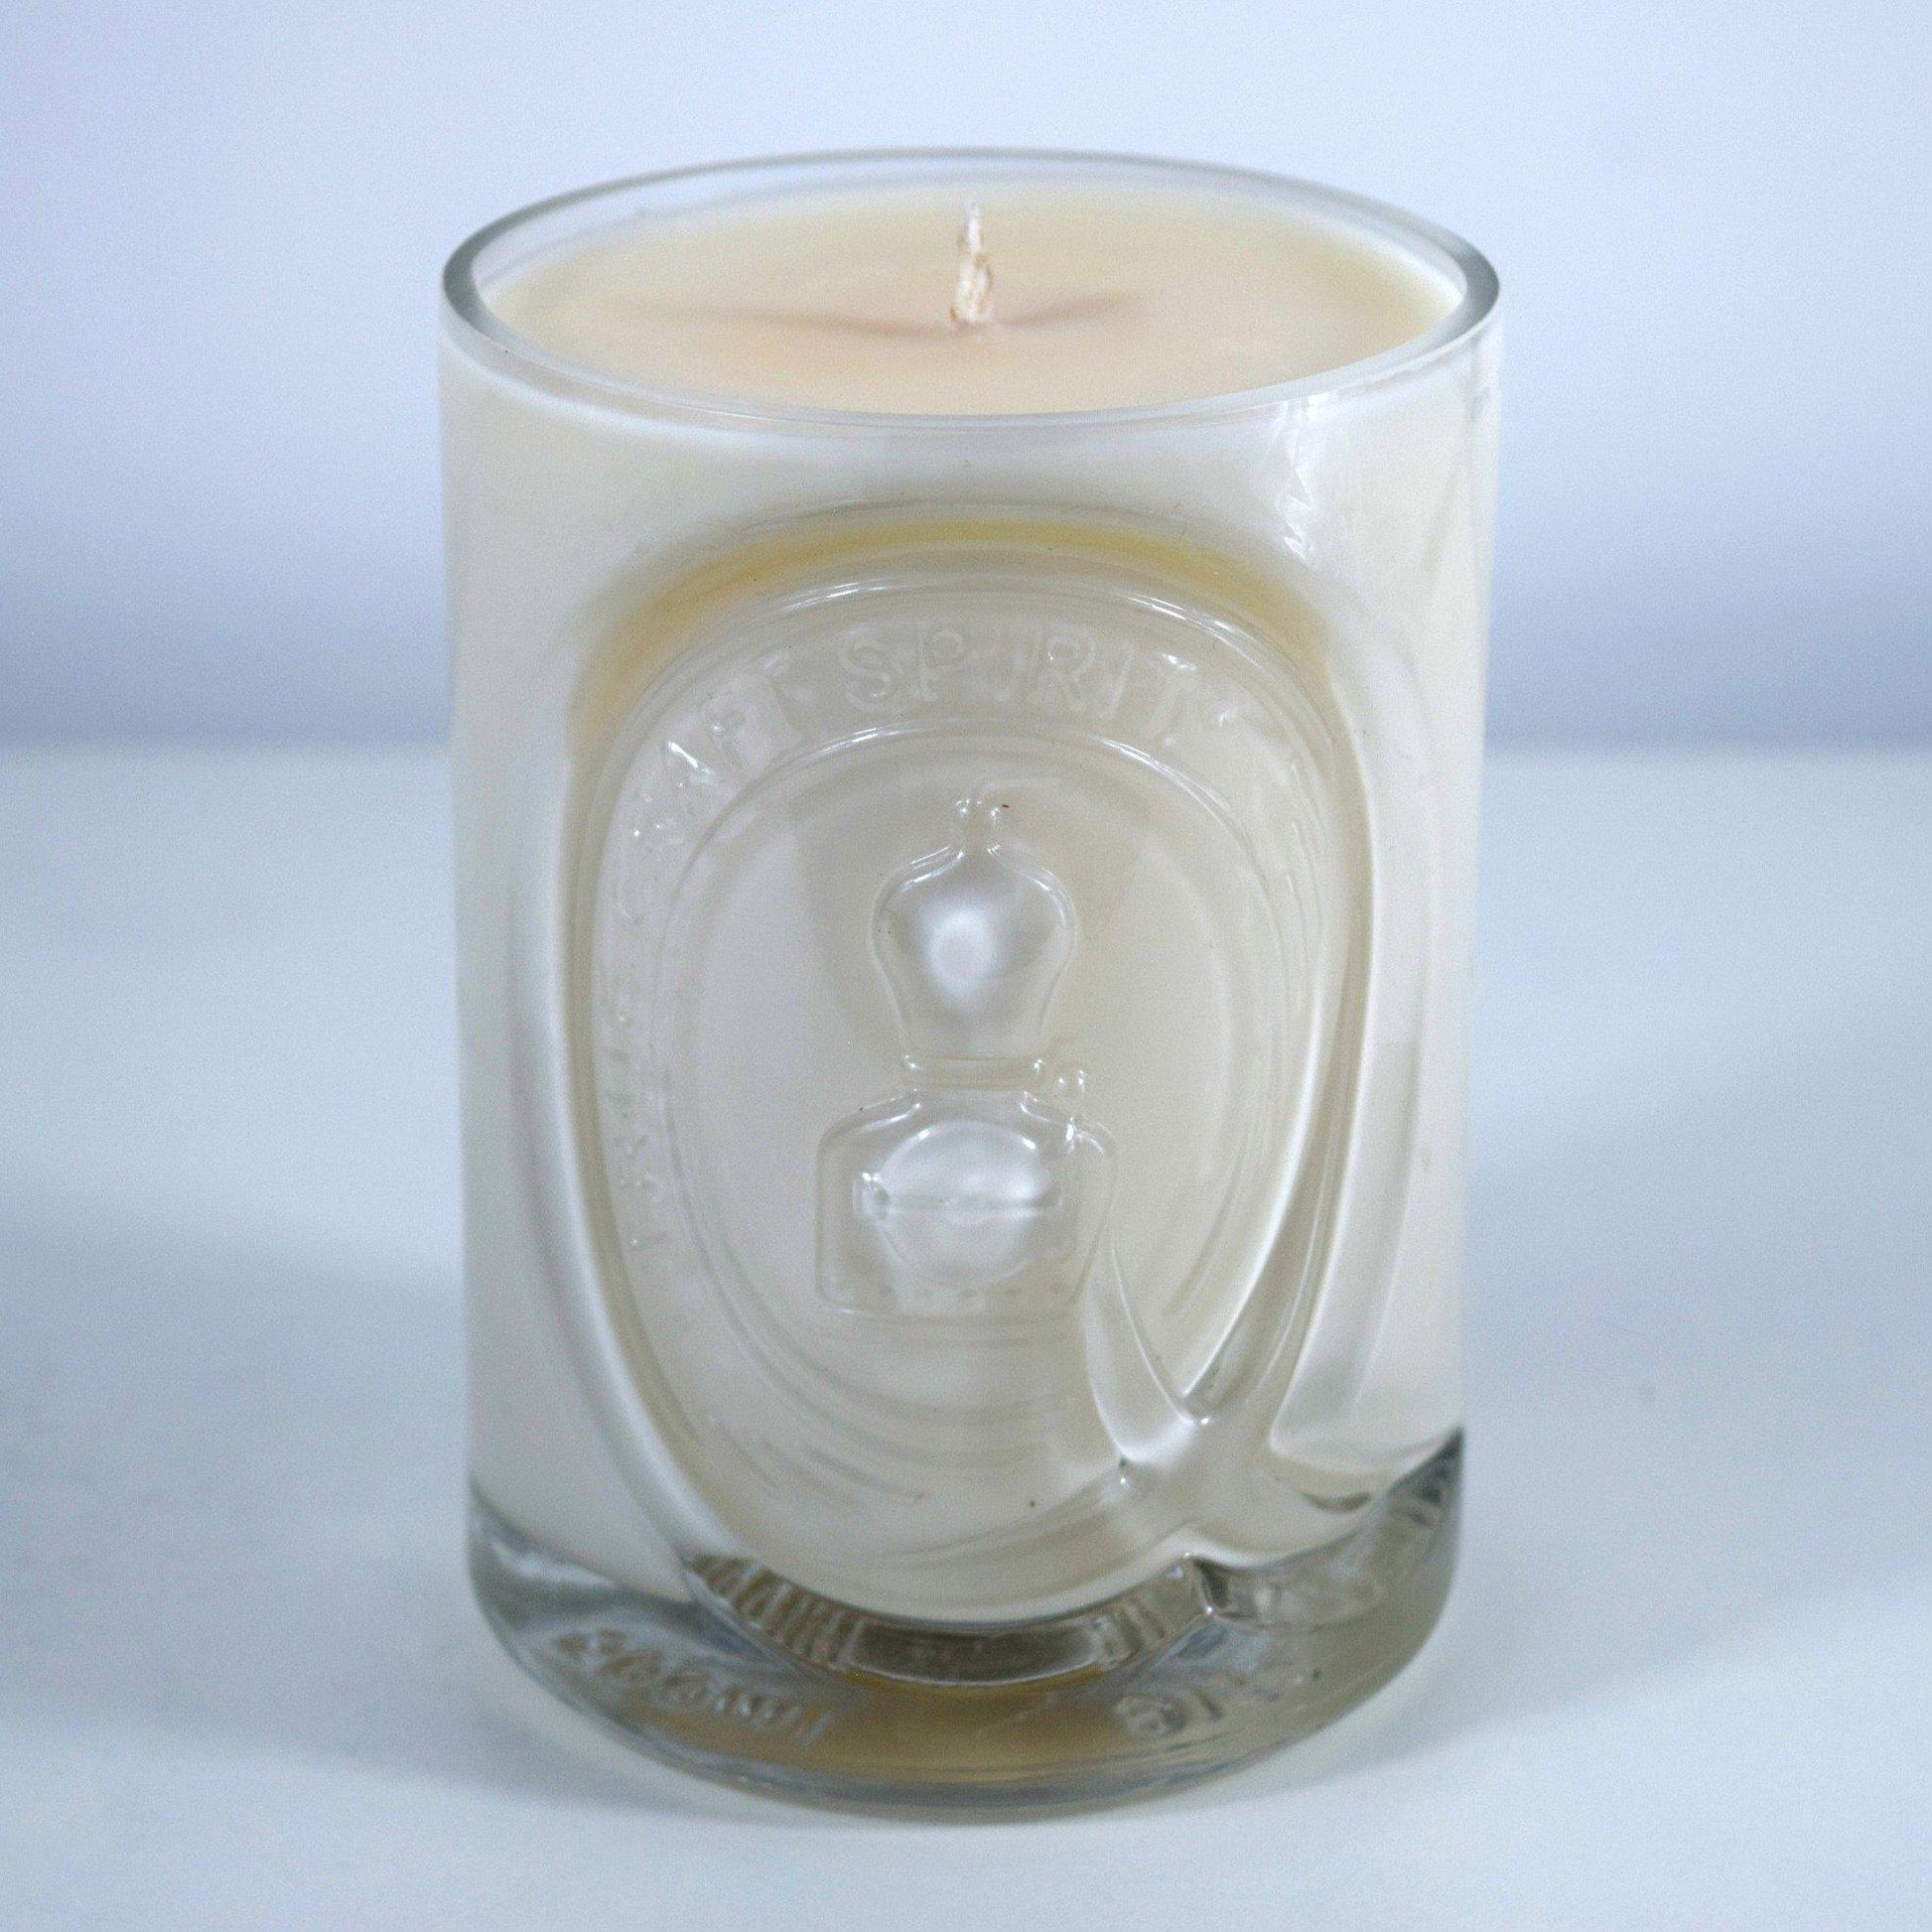 McQueen Forest Fruits Gin Bottle Candle Gin Bottle Candles Adhock Homeware